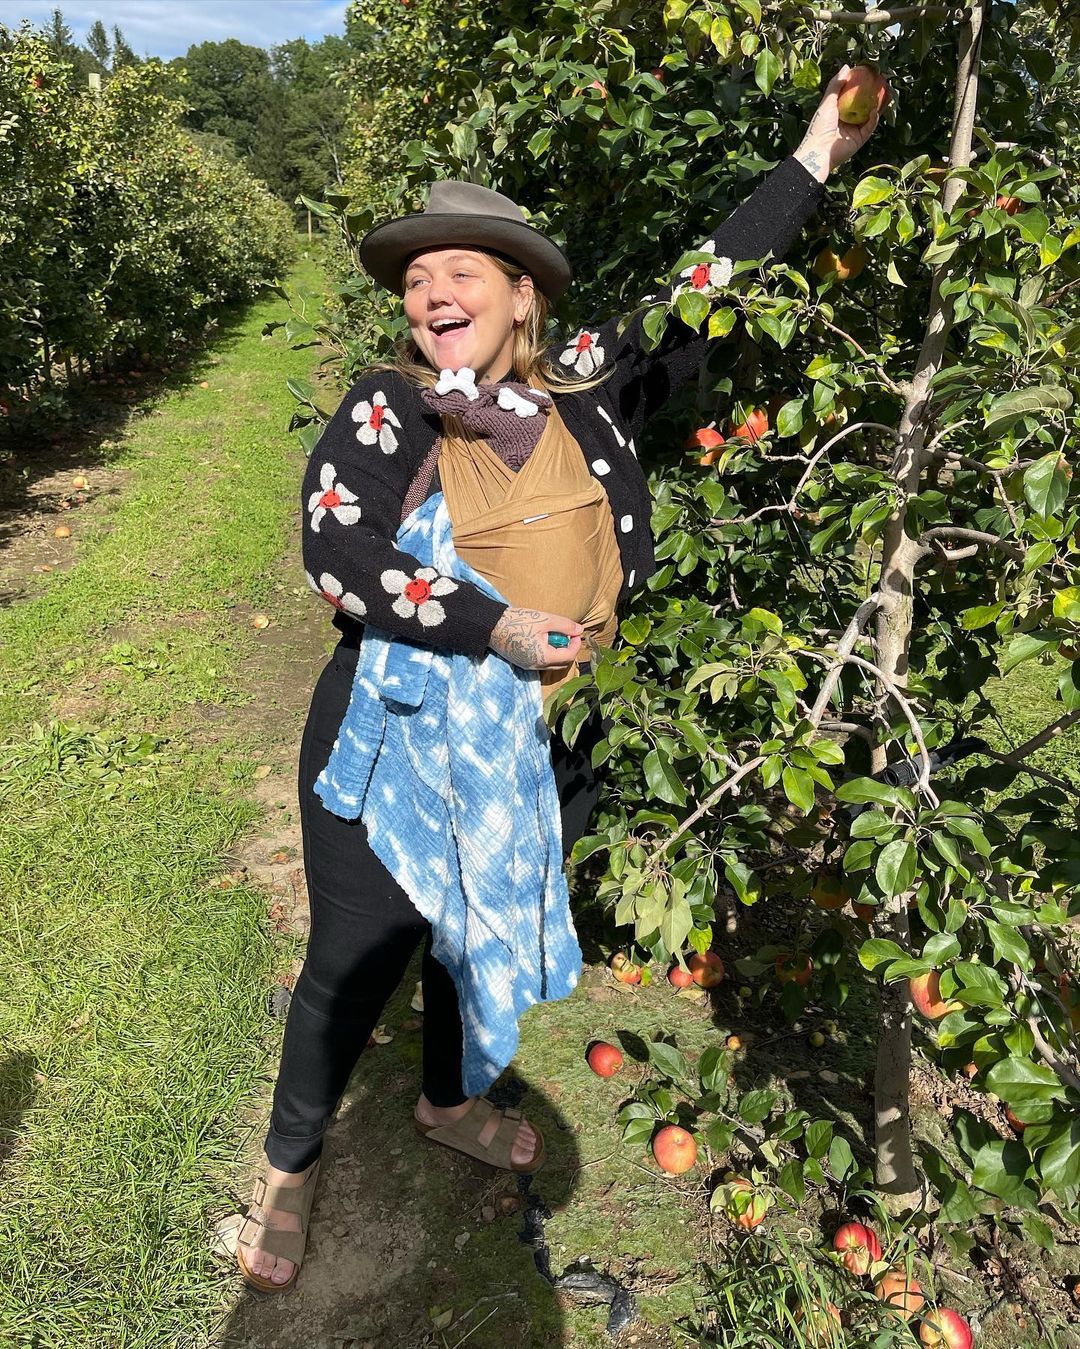 Celeb Families’ Pumpkin Patch, Apple Picking Photos in Fall 2021